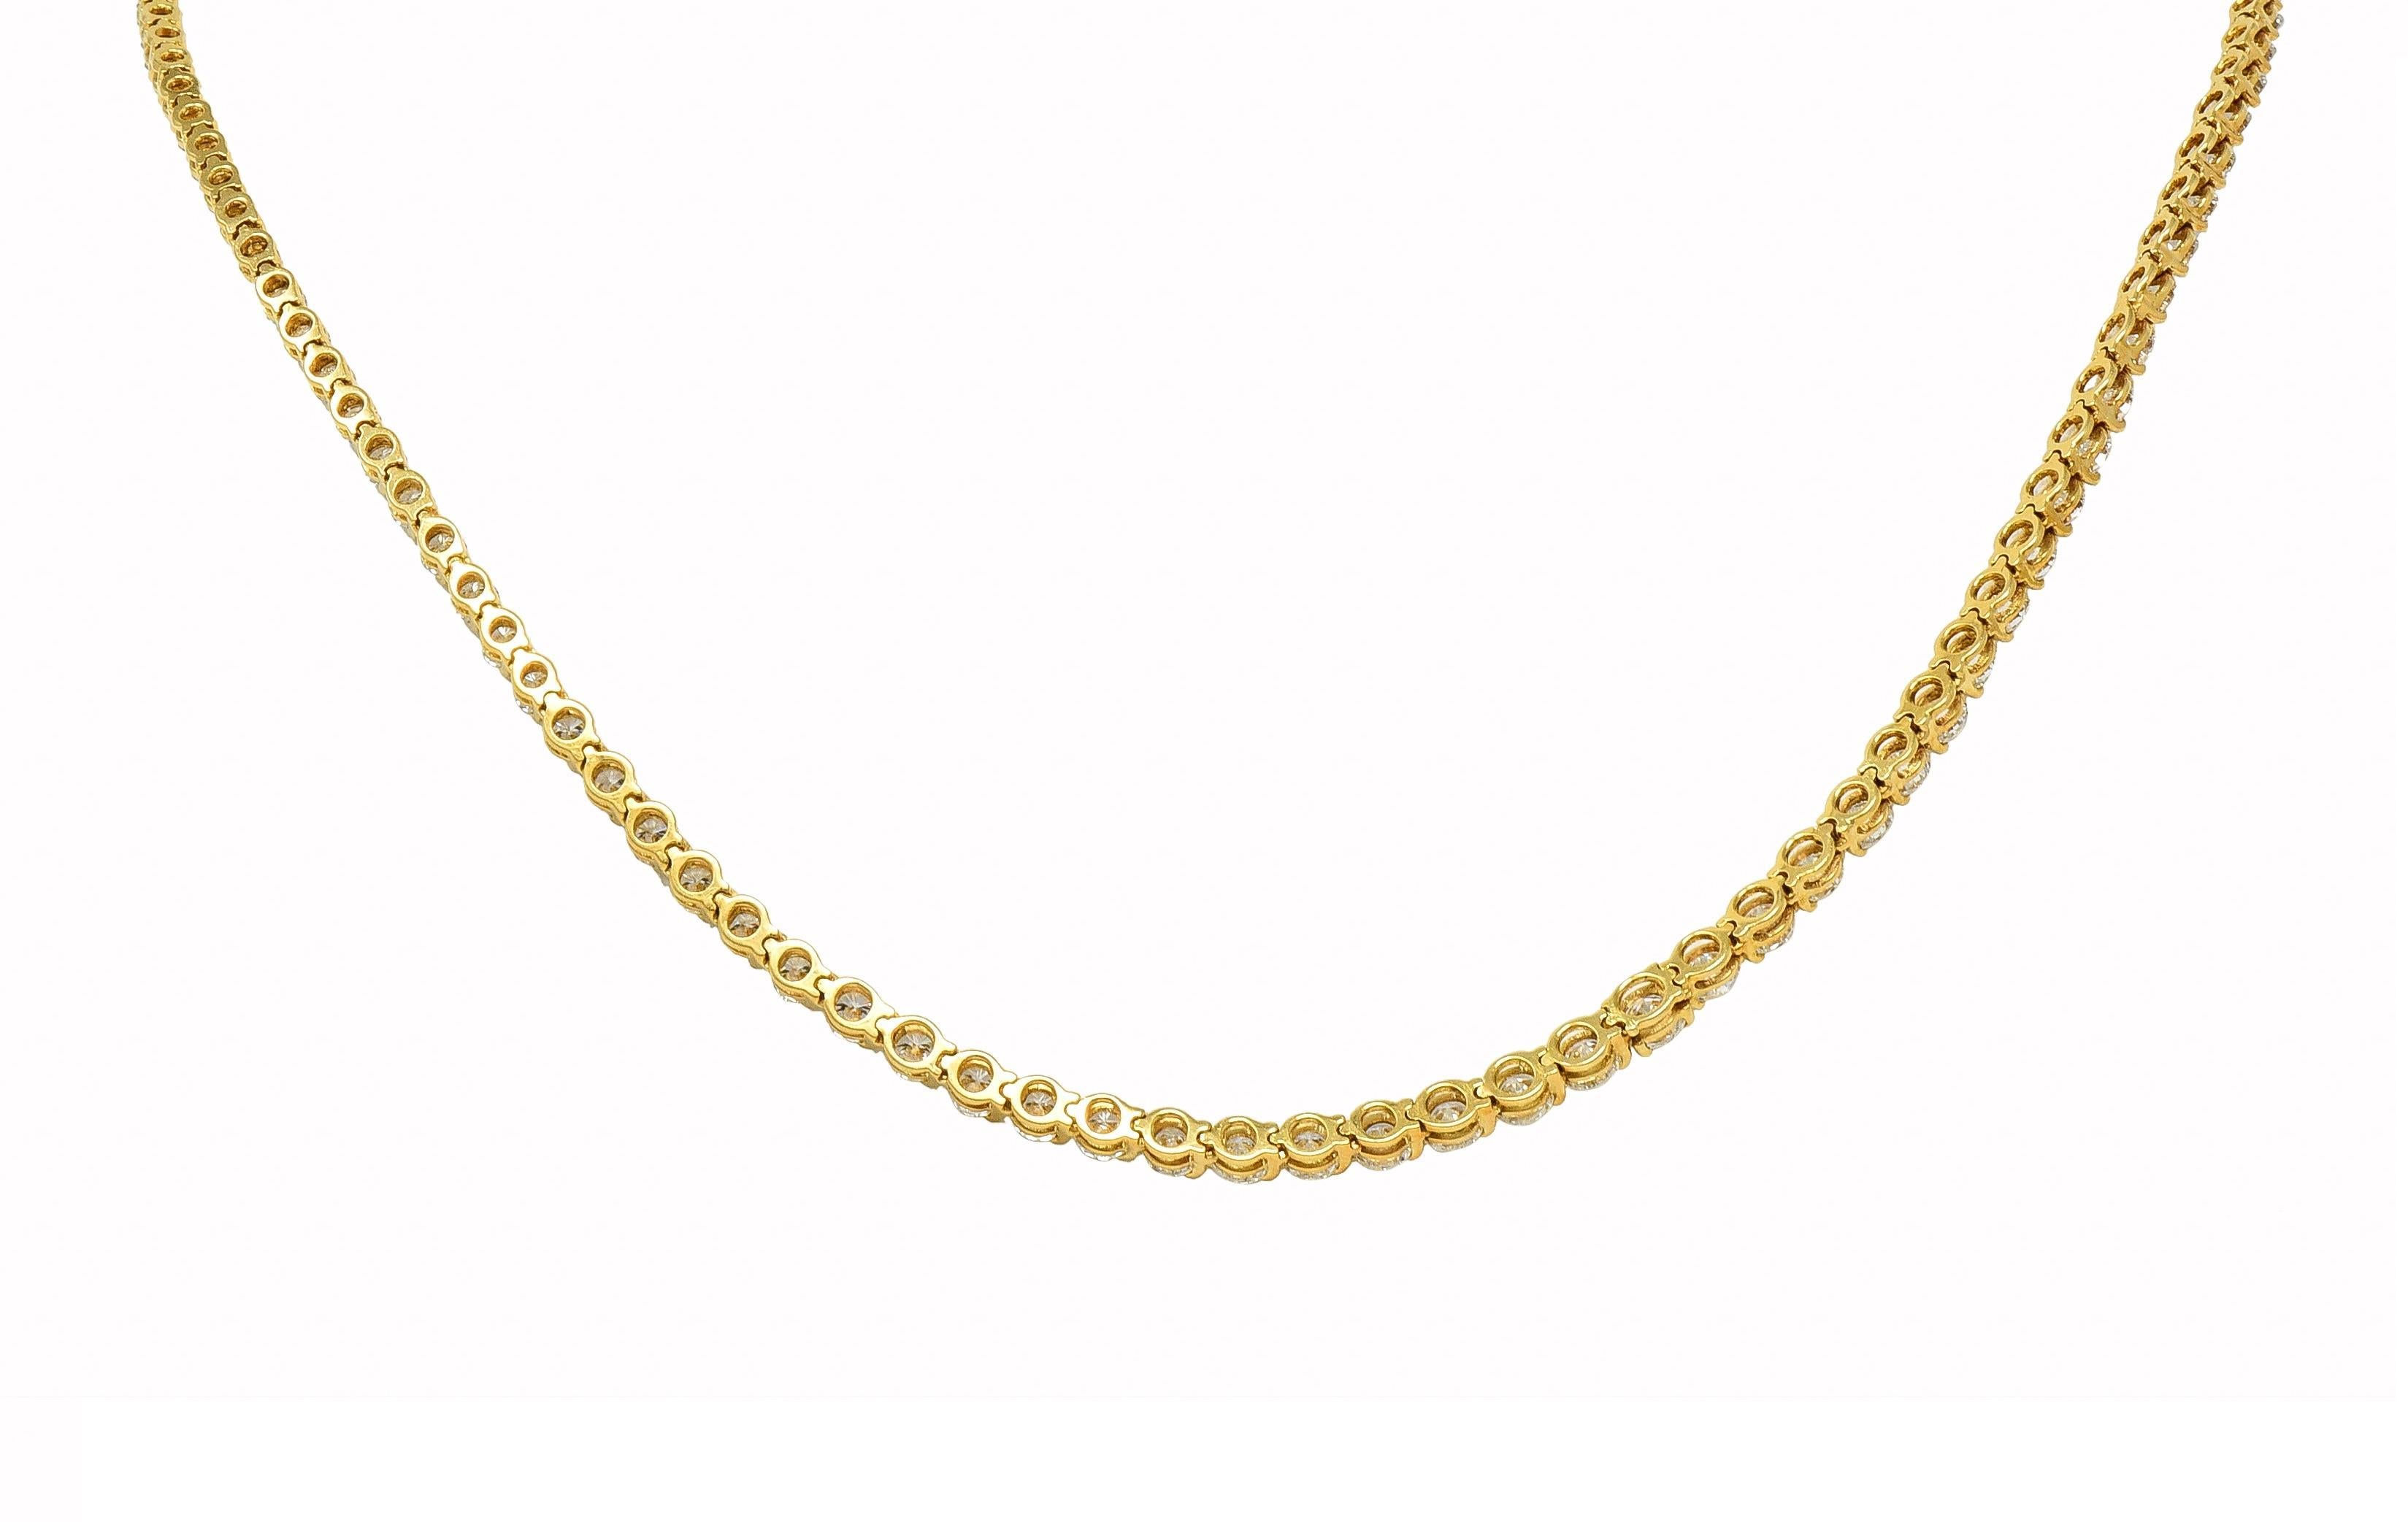 Tiffany & Co. 10.18 CTW Diamond 18 Karat Yellow Gold Victoria Riviera Necklace In Excellent Condition For Sale In Philadelphia, PA